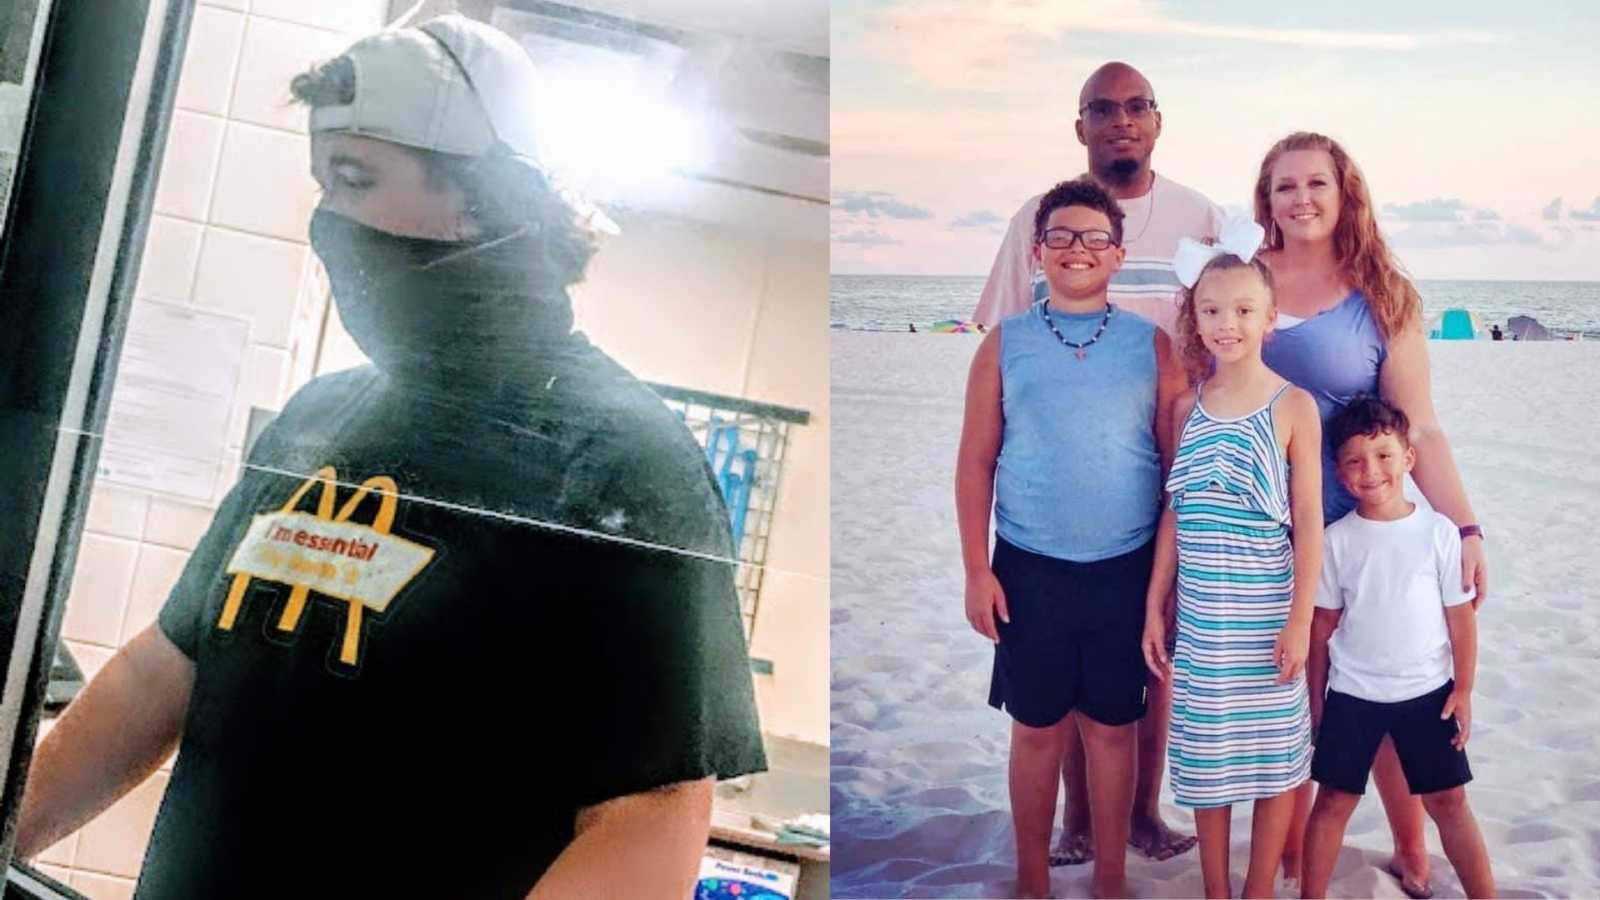 Left: mcdonalds cashier at drive through window, Right: family standing on the beach